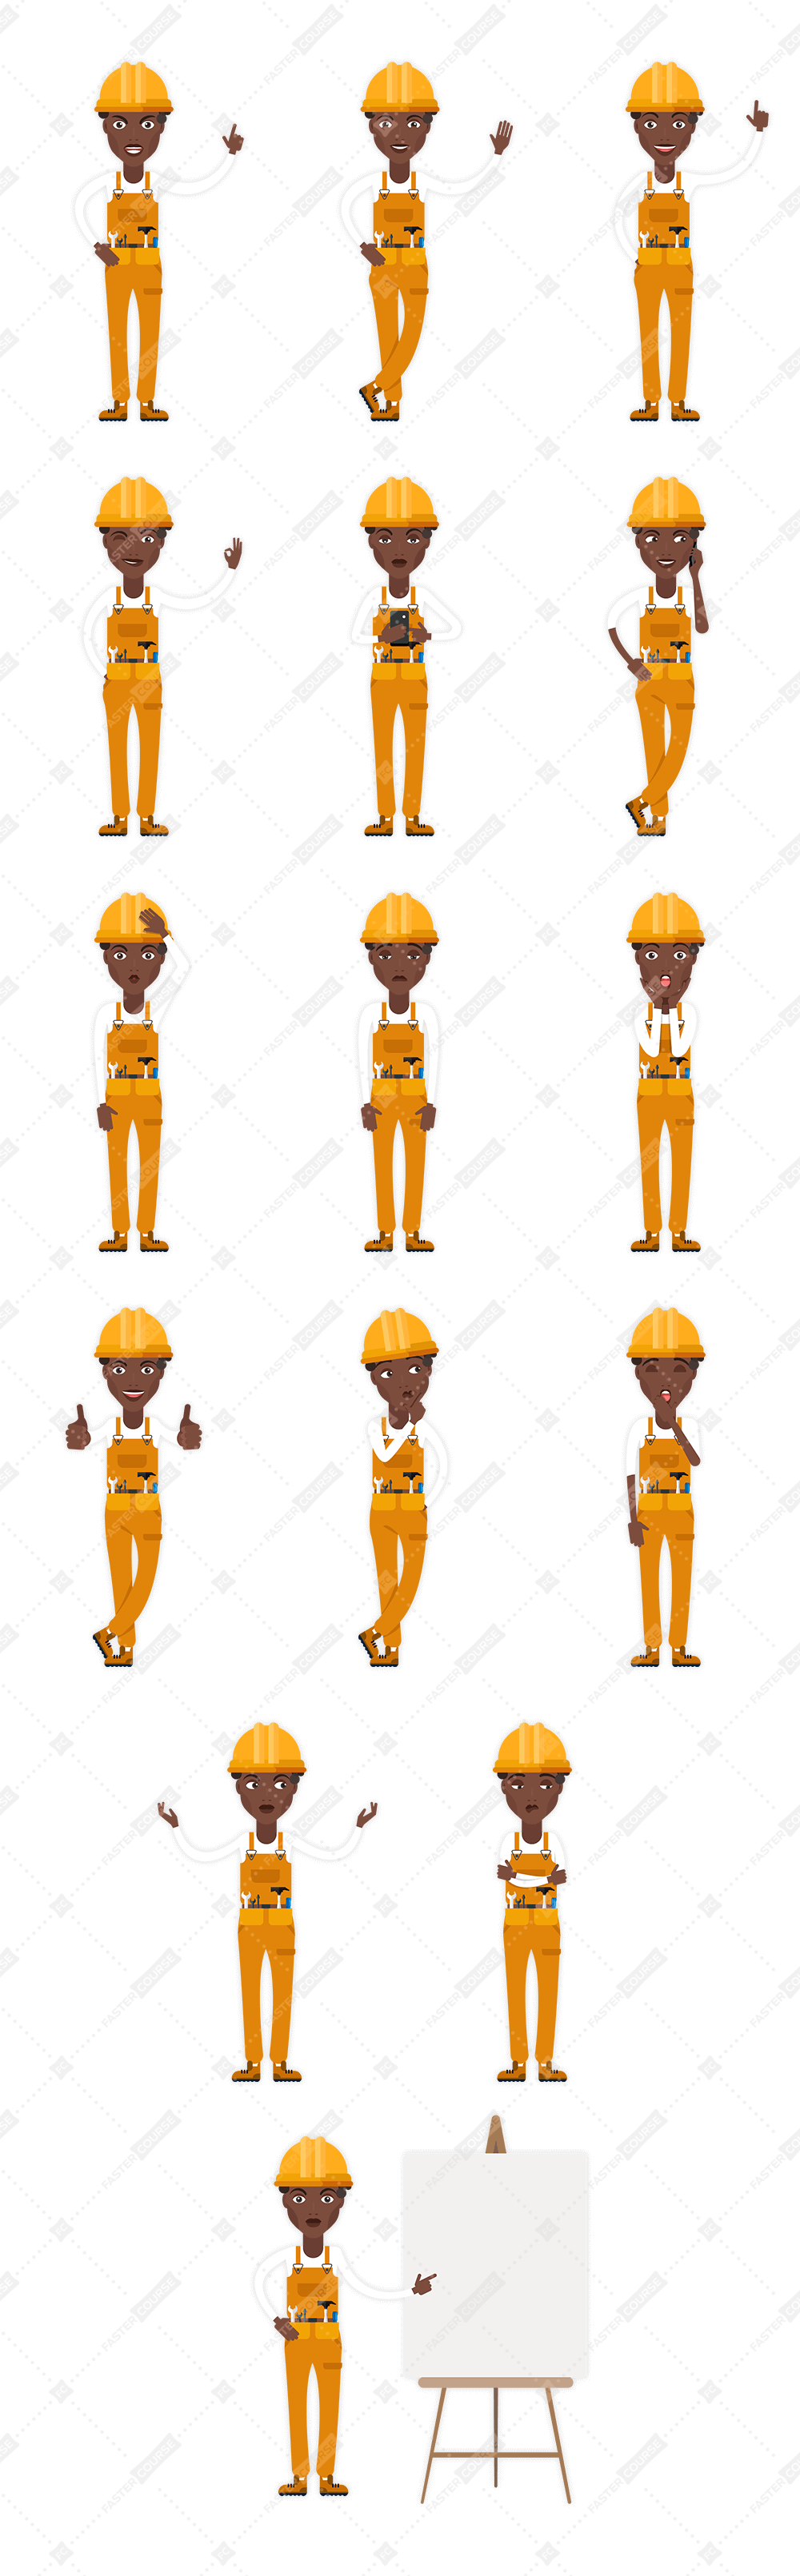 Characters_All_Poses_Constructions_Emma_wm